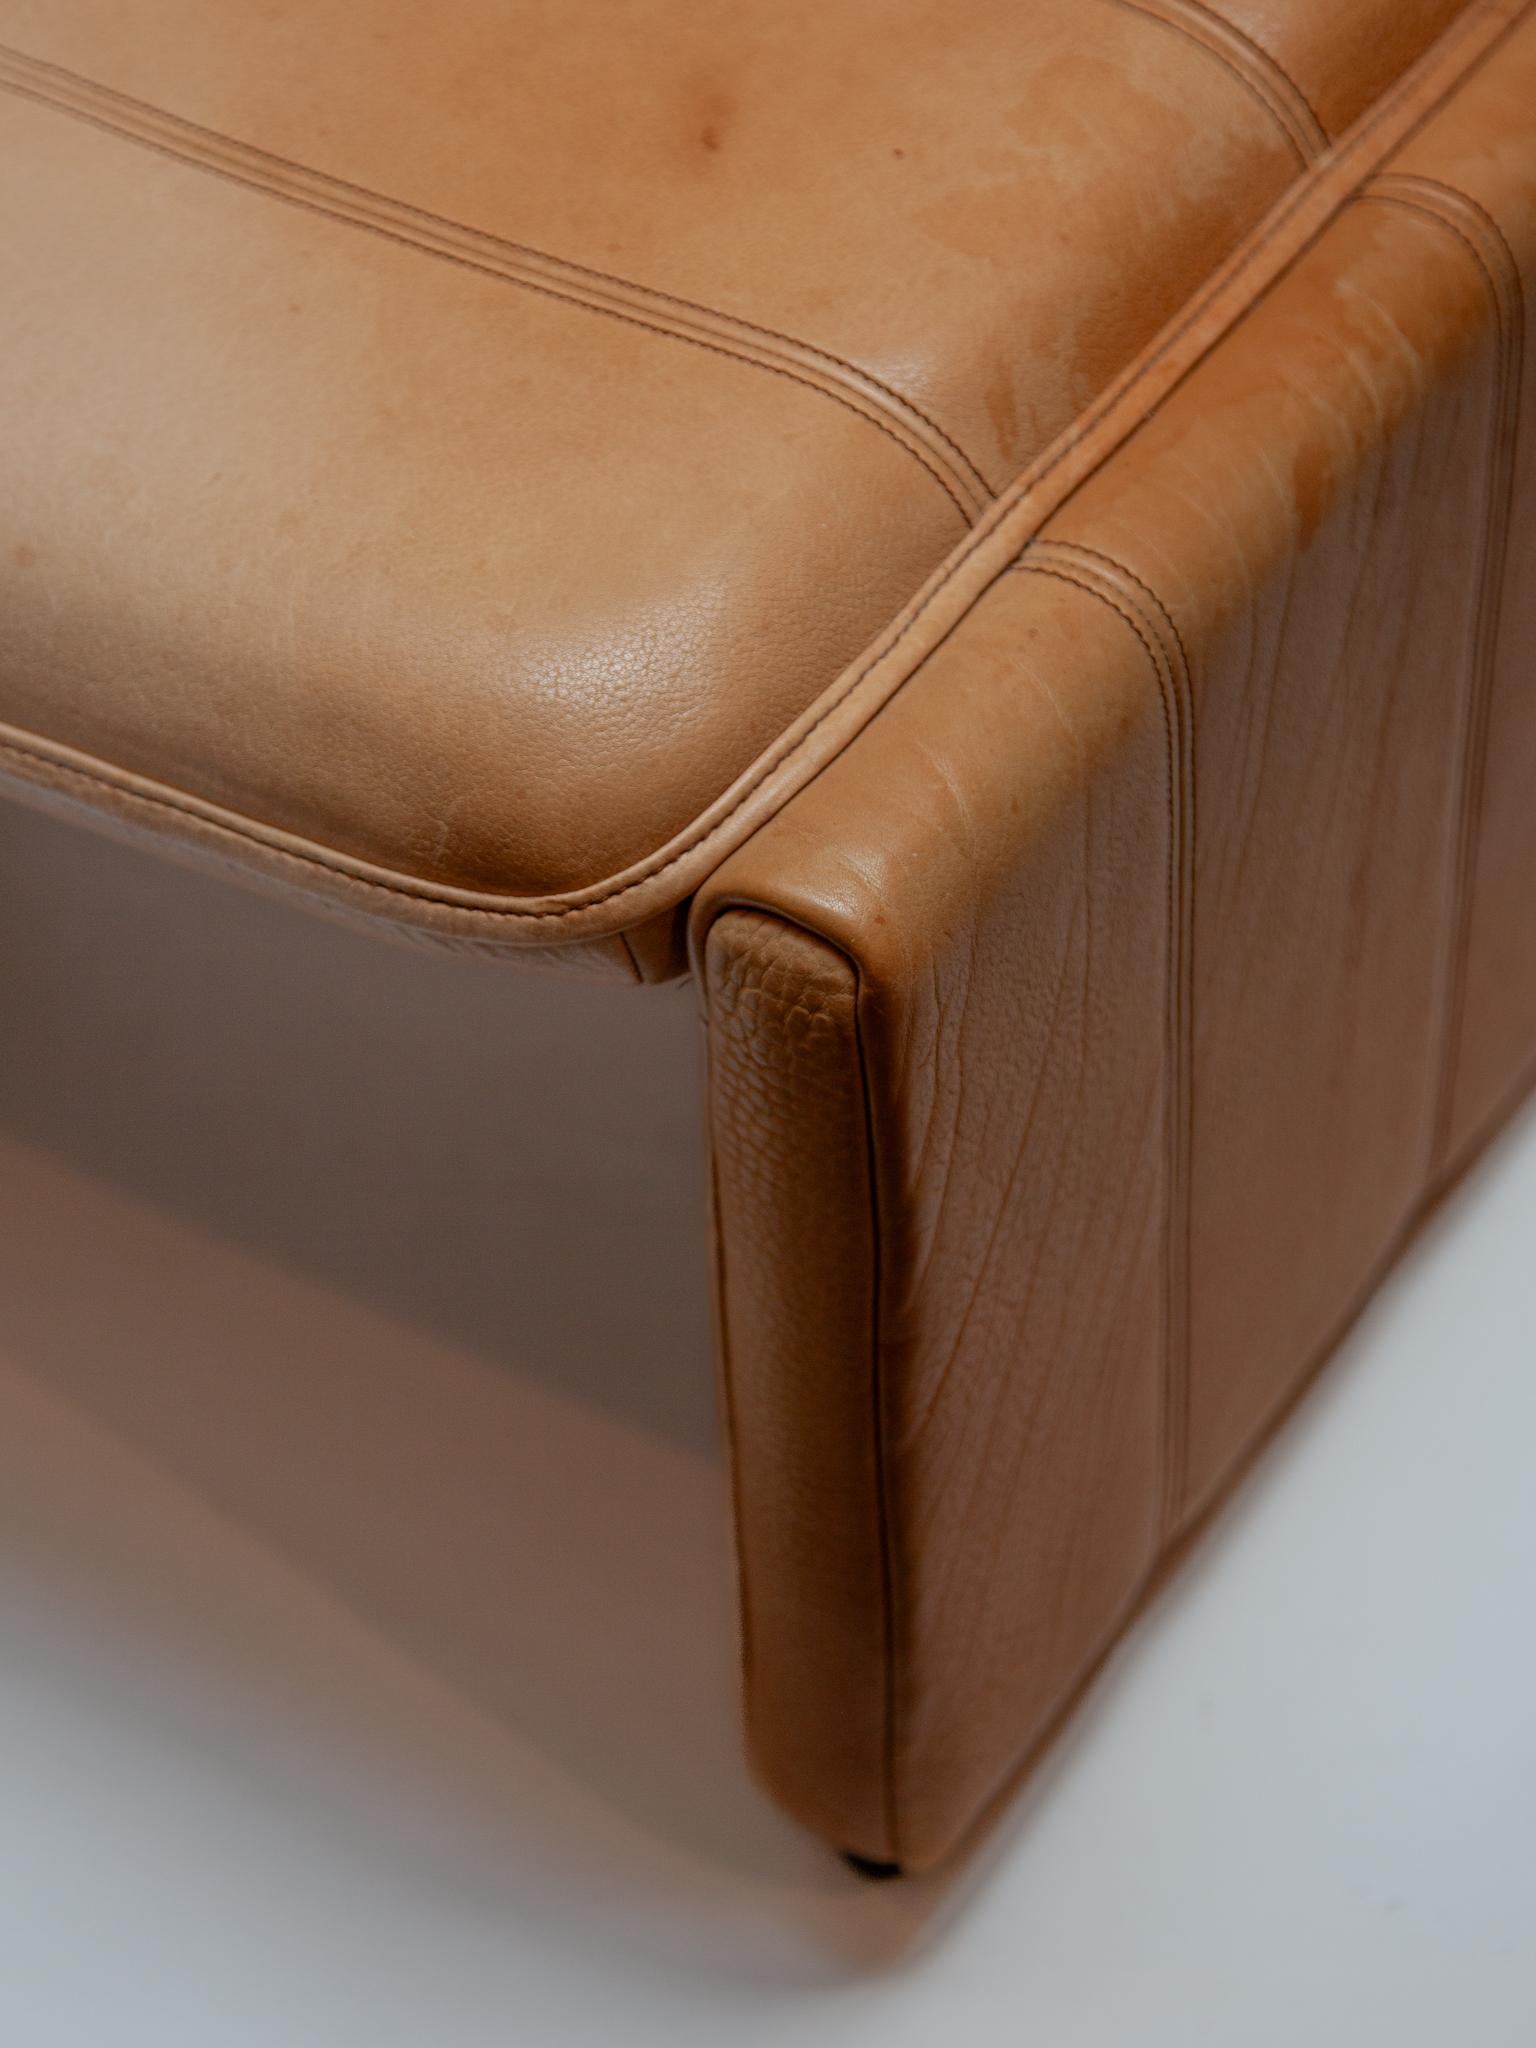 DS-50 Camel Buffalo Neck Leather Lounge Chair & Footstool by De Sede, 1970s For Sale 4